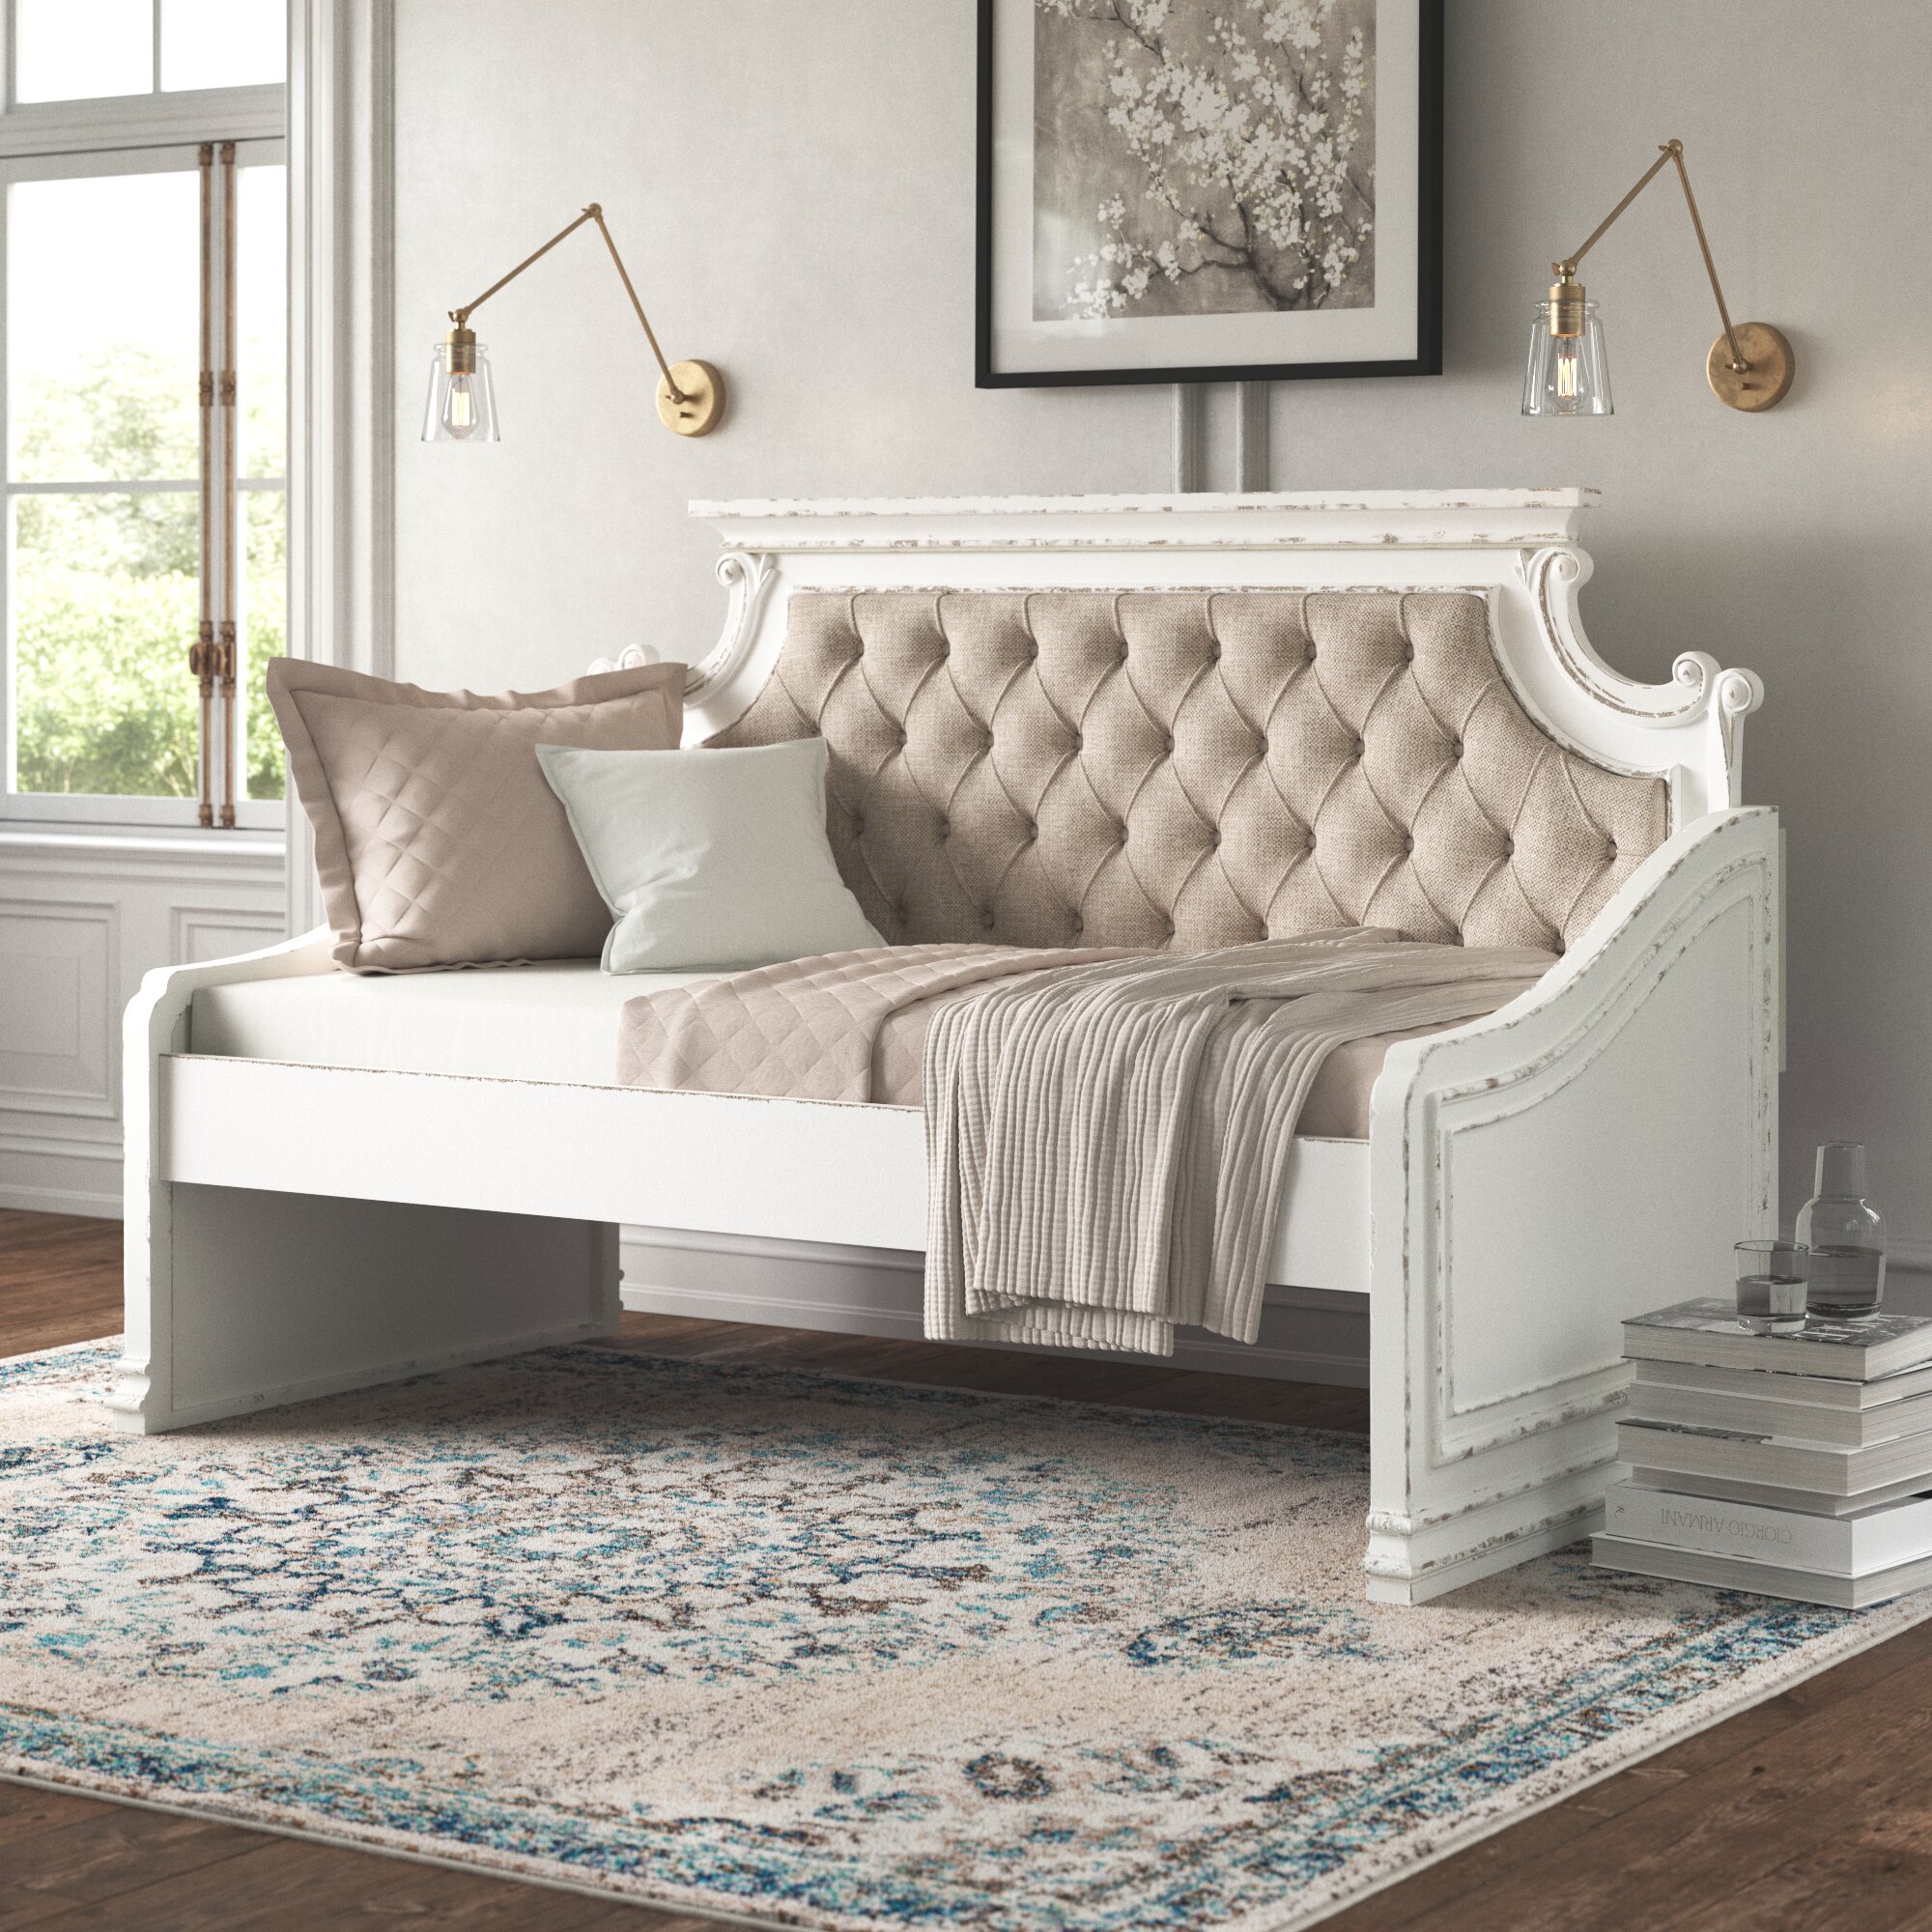 Wayfair | Country / Farmhouse Daybeds You'll Love in 2022